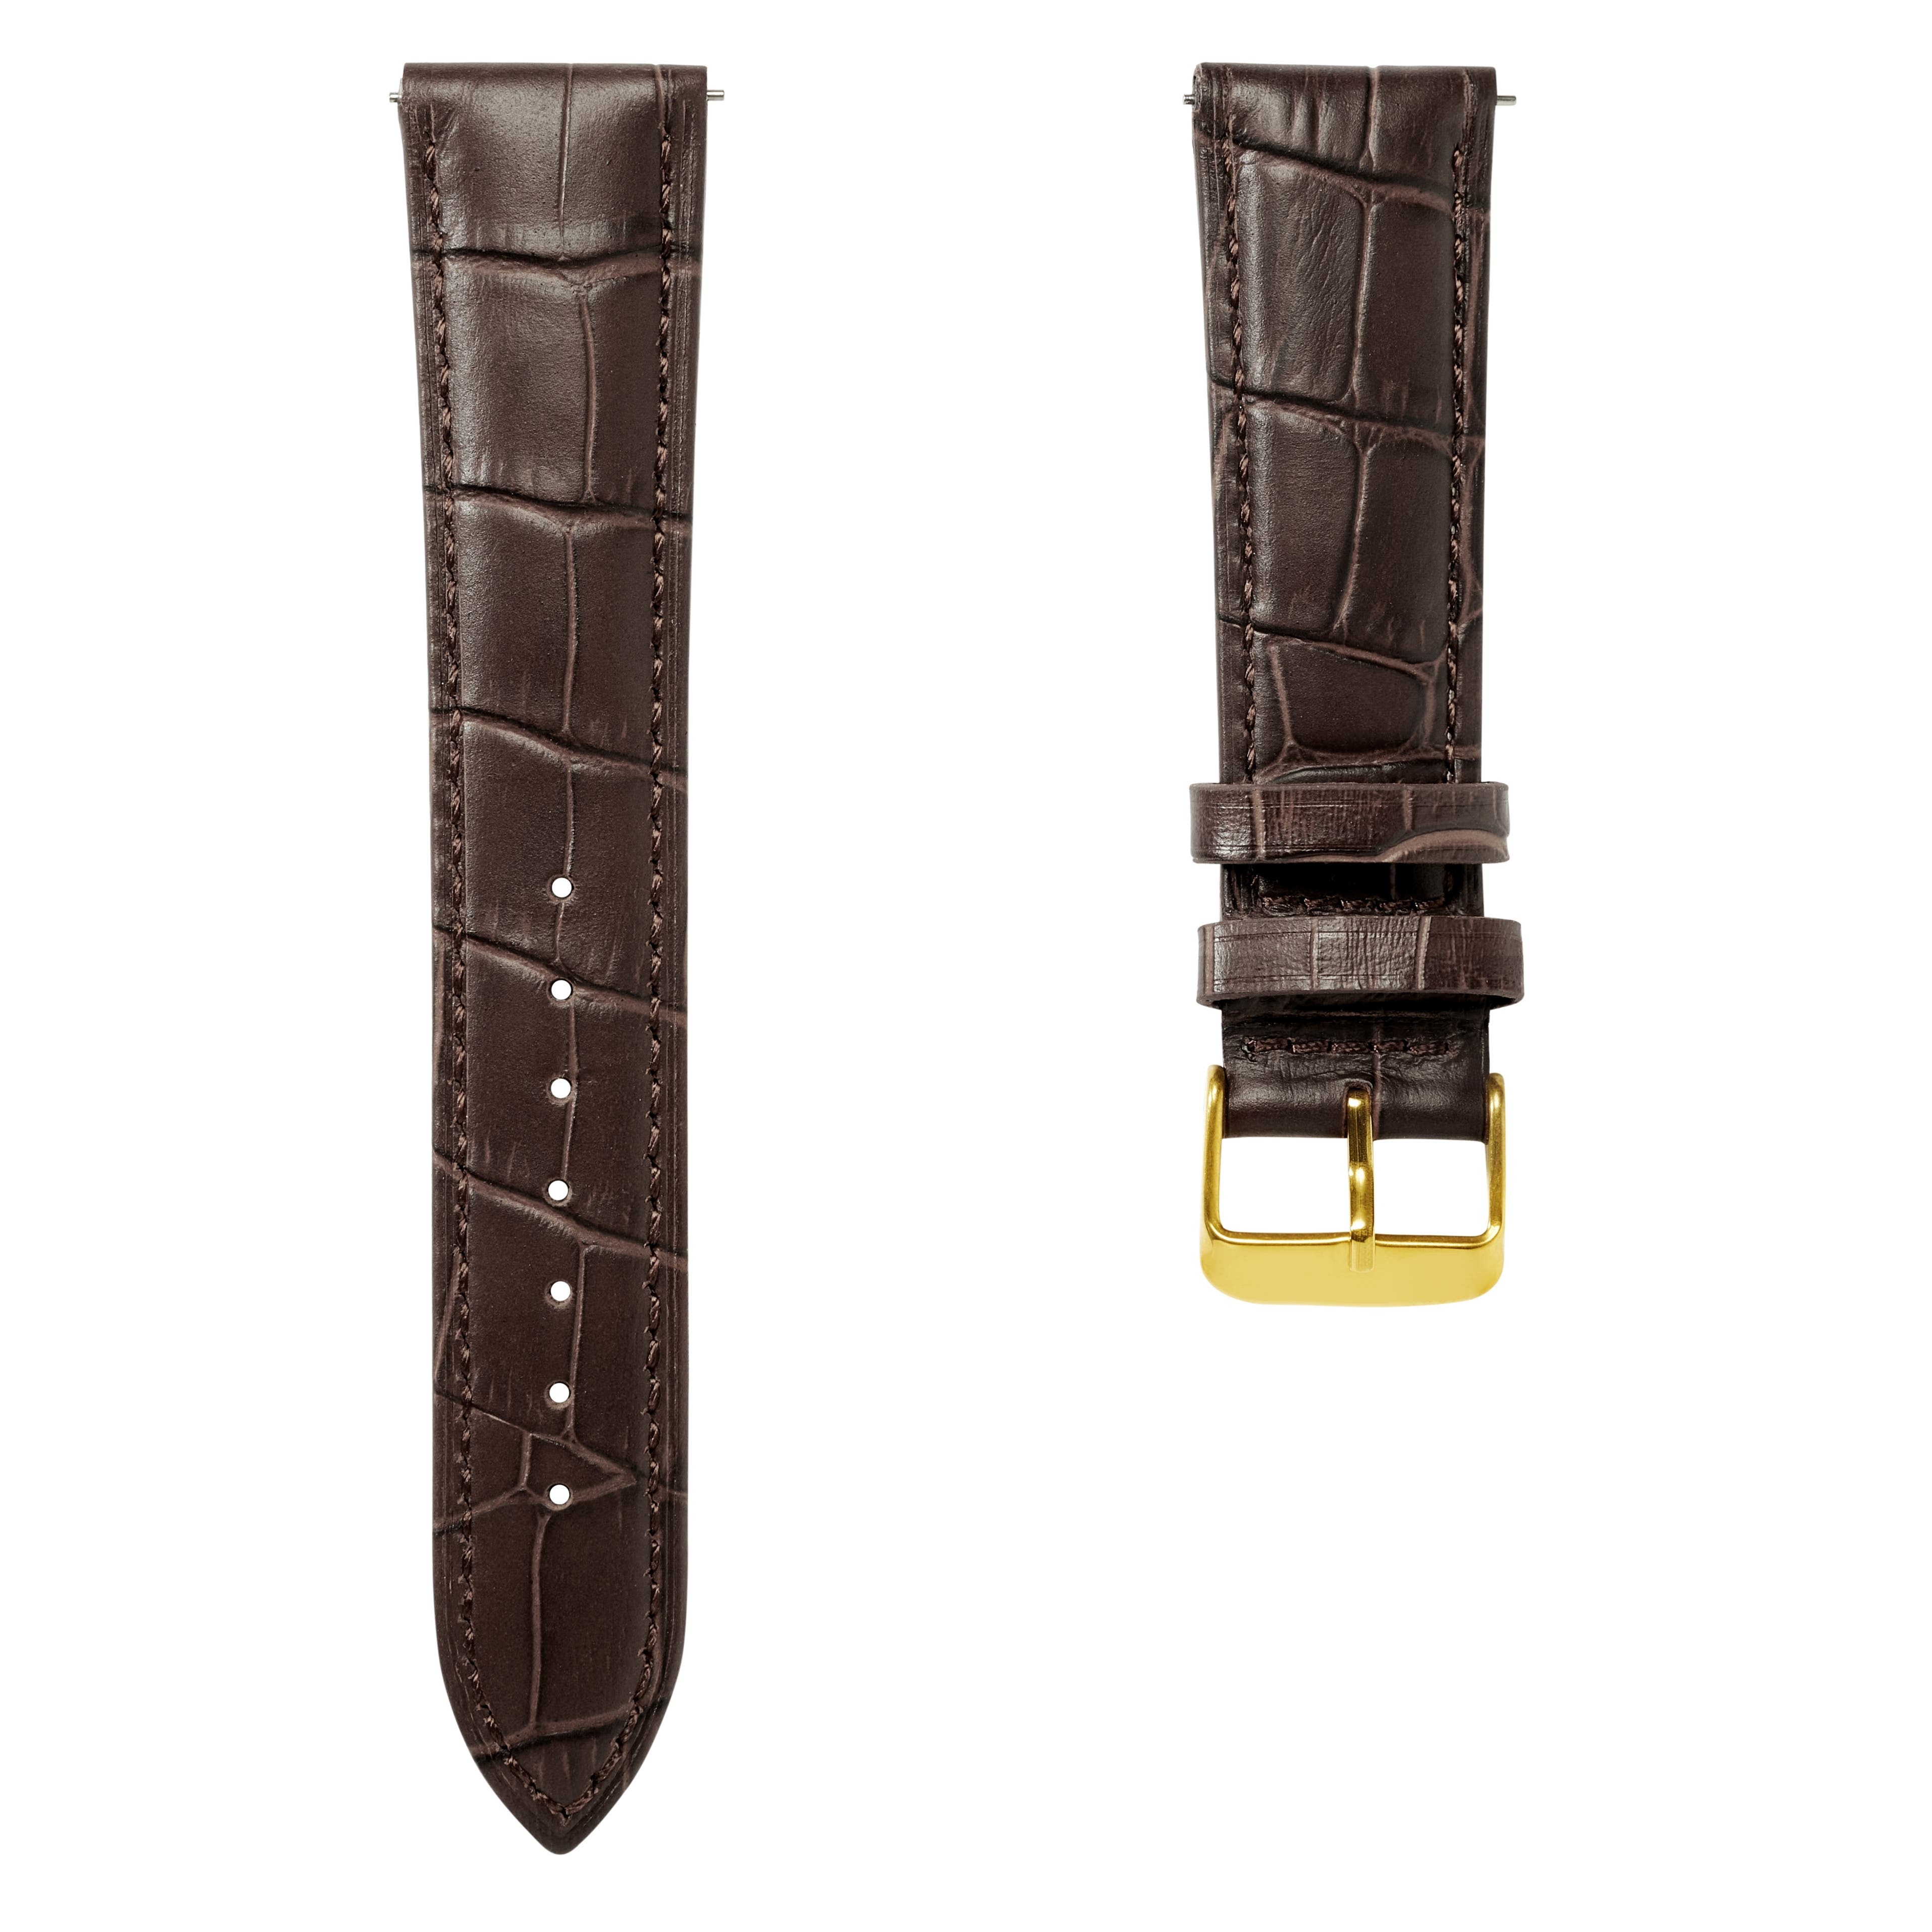 7/8" (22 mm) Crocodile-Embossed Dark-Brown Leather Watch Strap with Gold-Tone Buckle – Quick Release